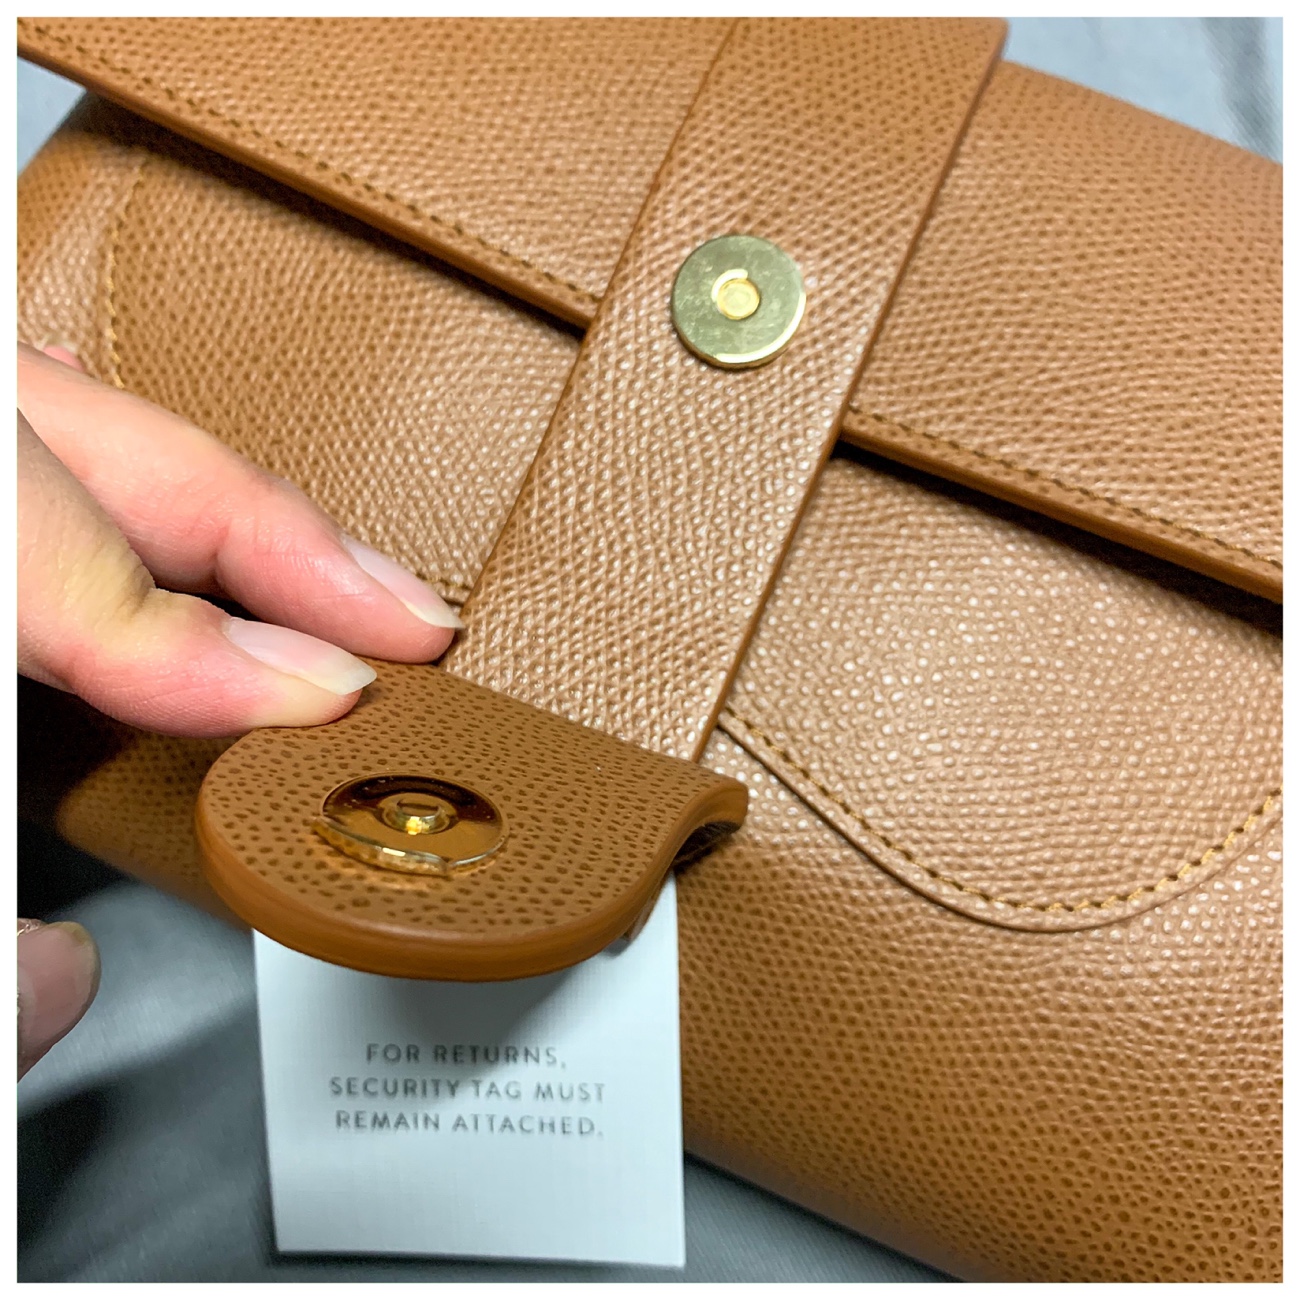 Sharing my review and what fits inside my @senreve Aria belt bag